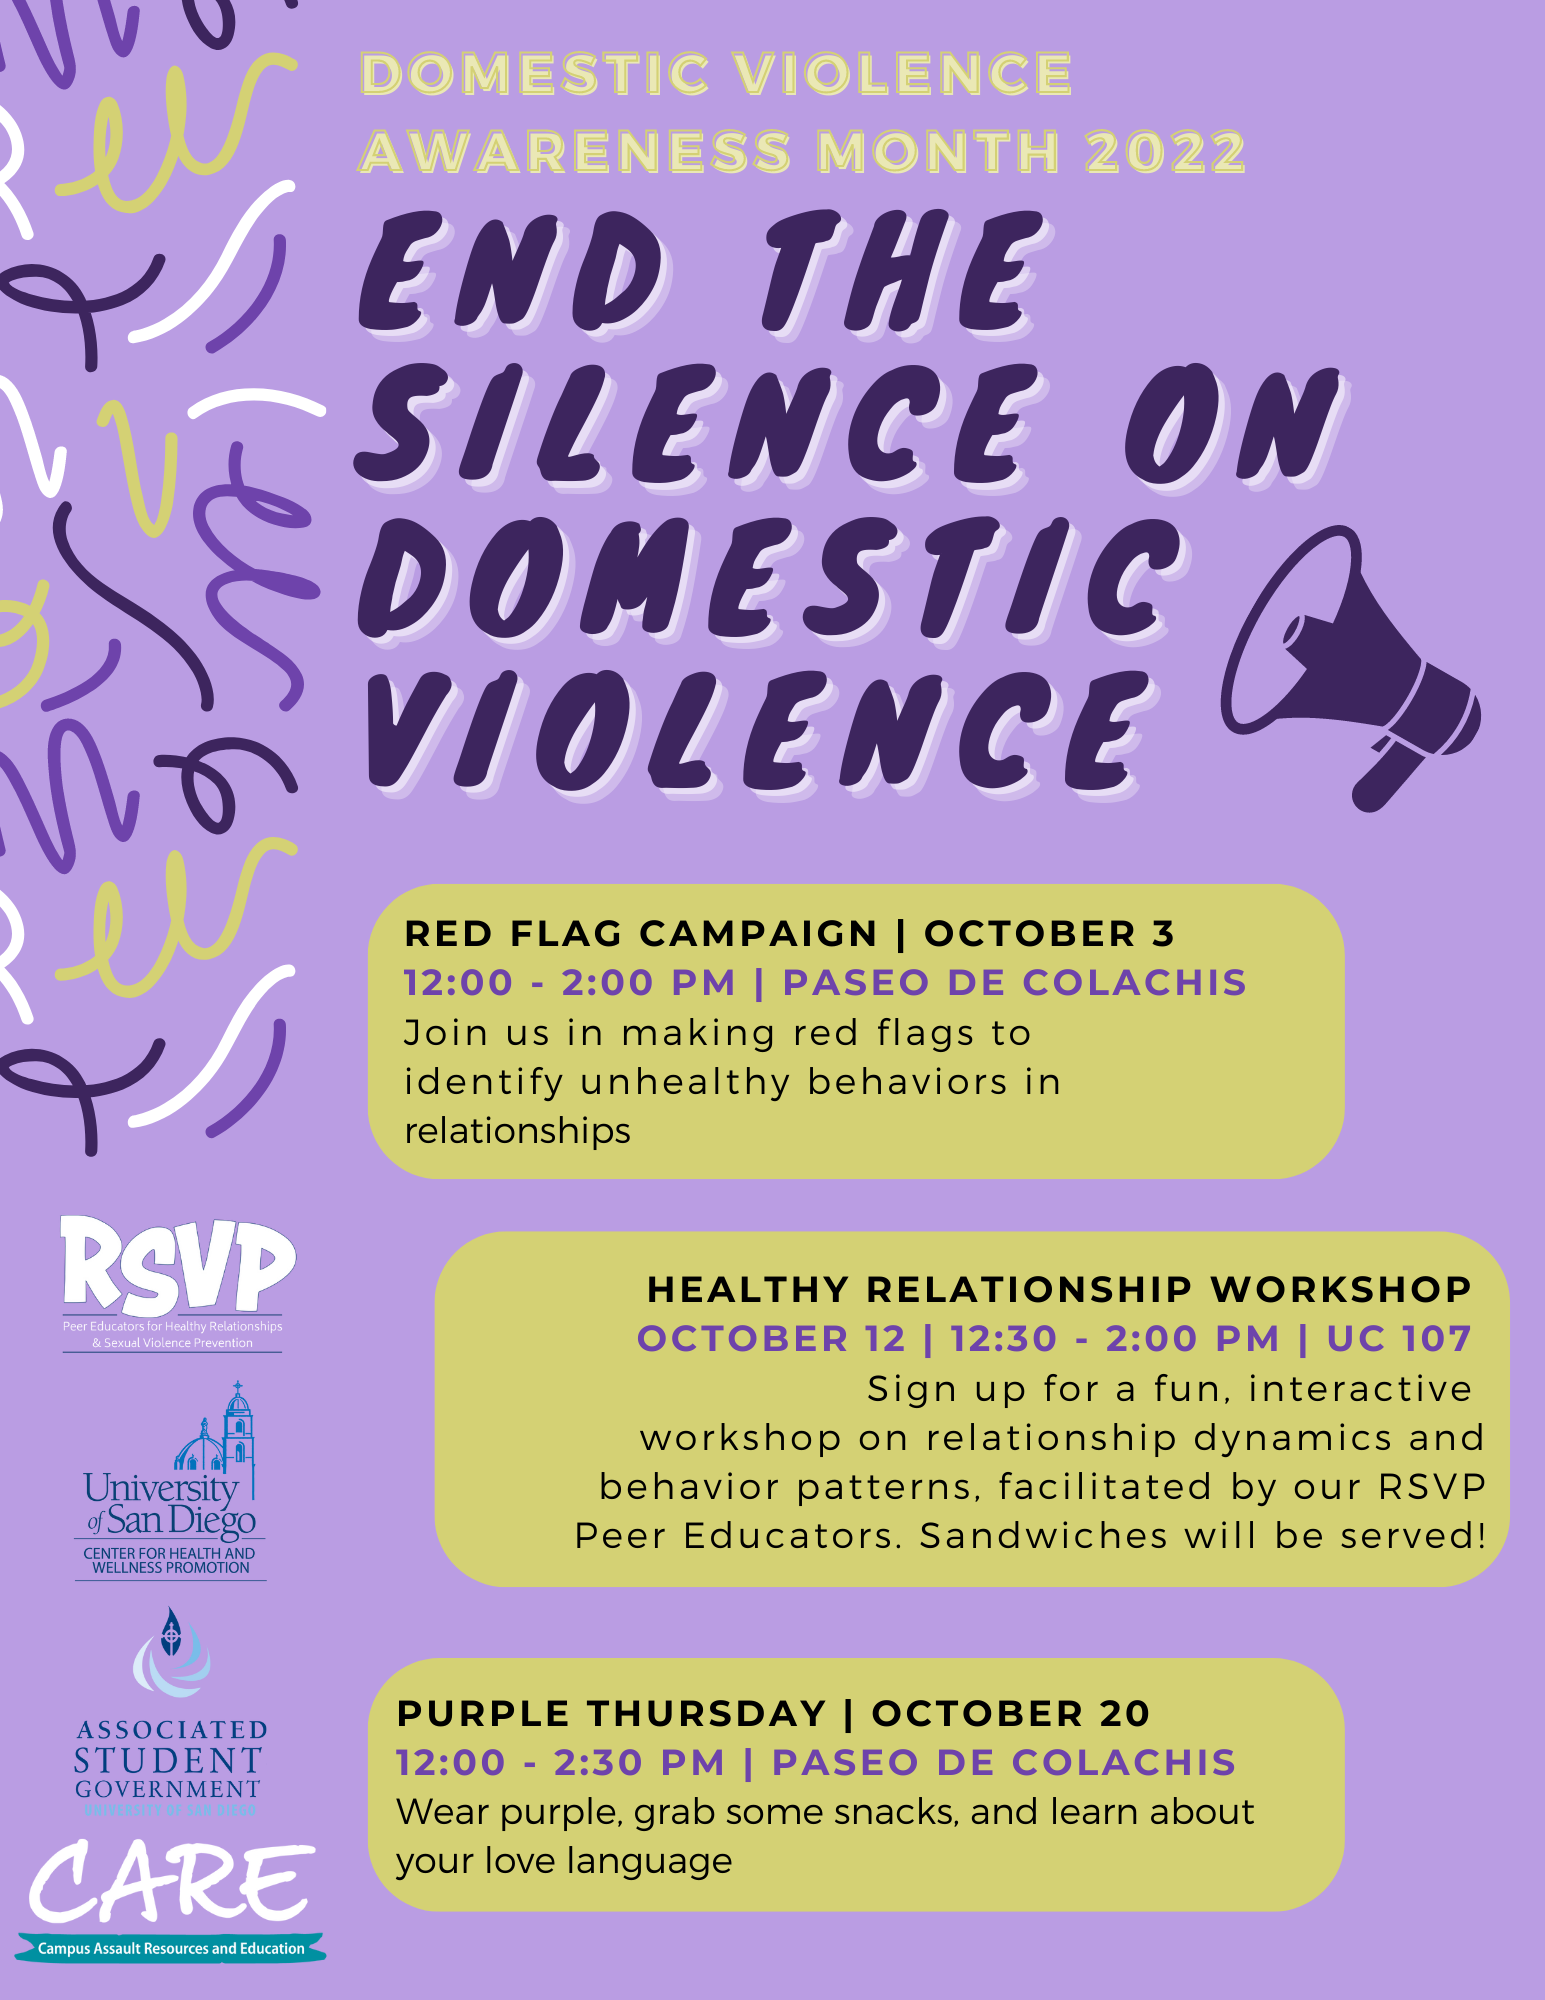 Lavender background with green, purple, and white squiggly lines, a purple megaphone graphic, bold purple text that reads “End the Silence on Domestic Violence,” bold green text that reads “Domestic V